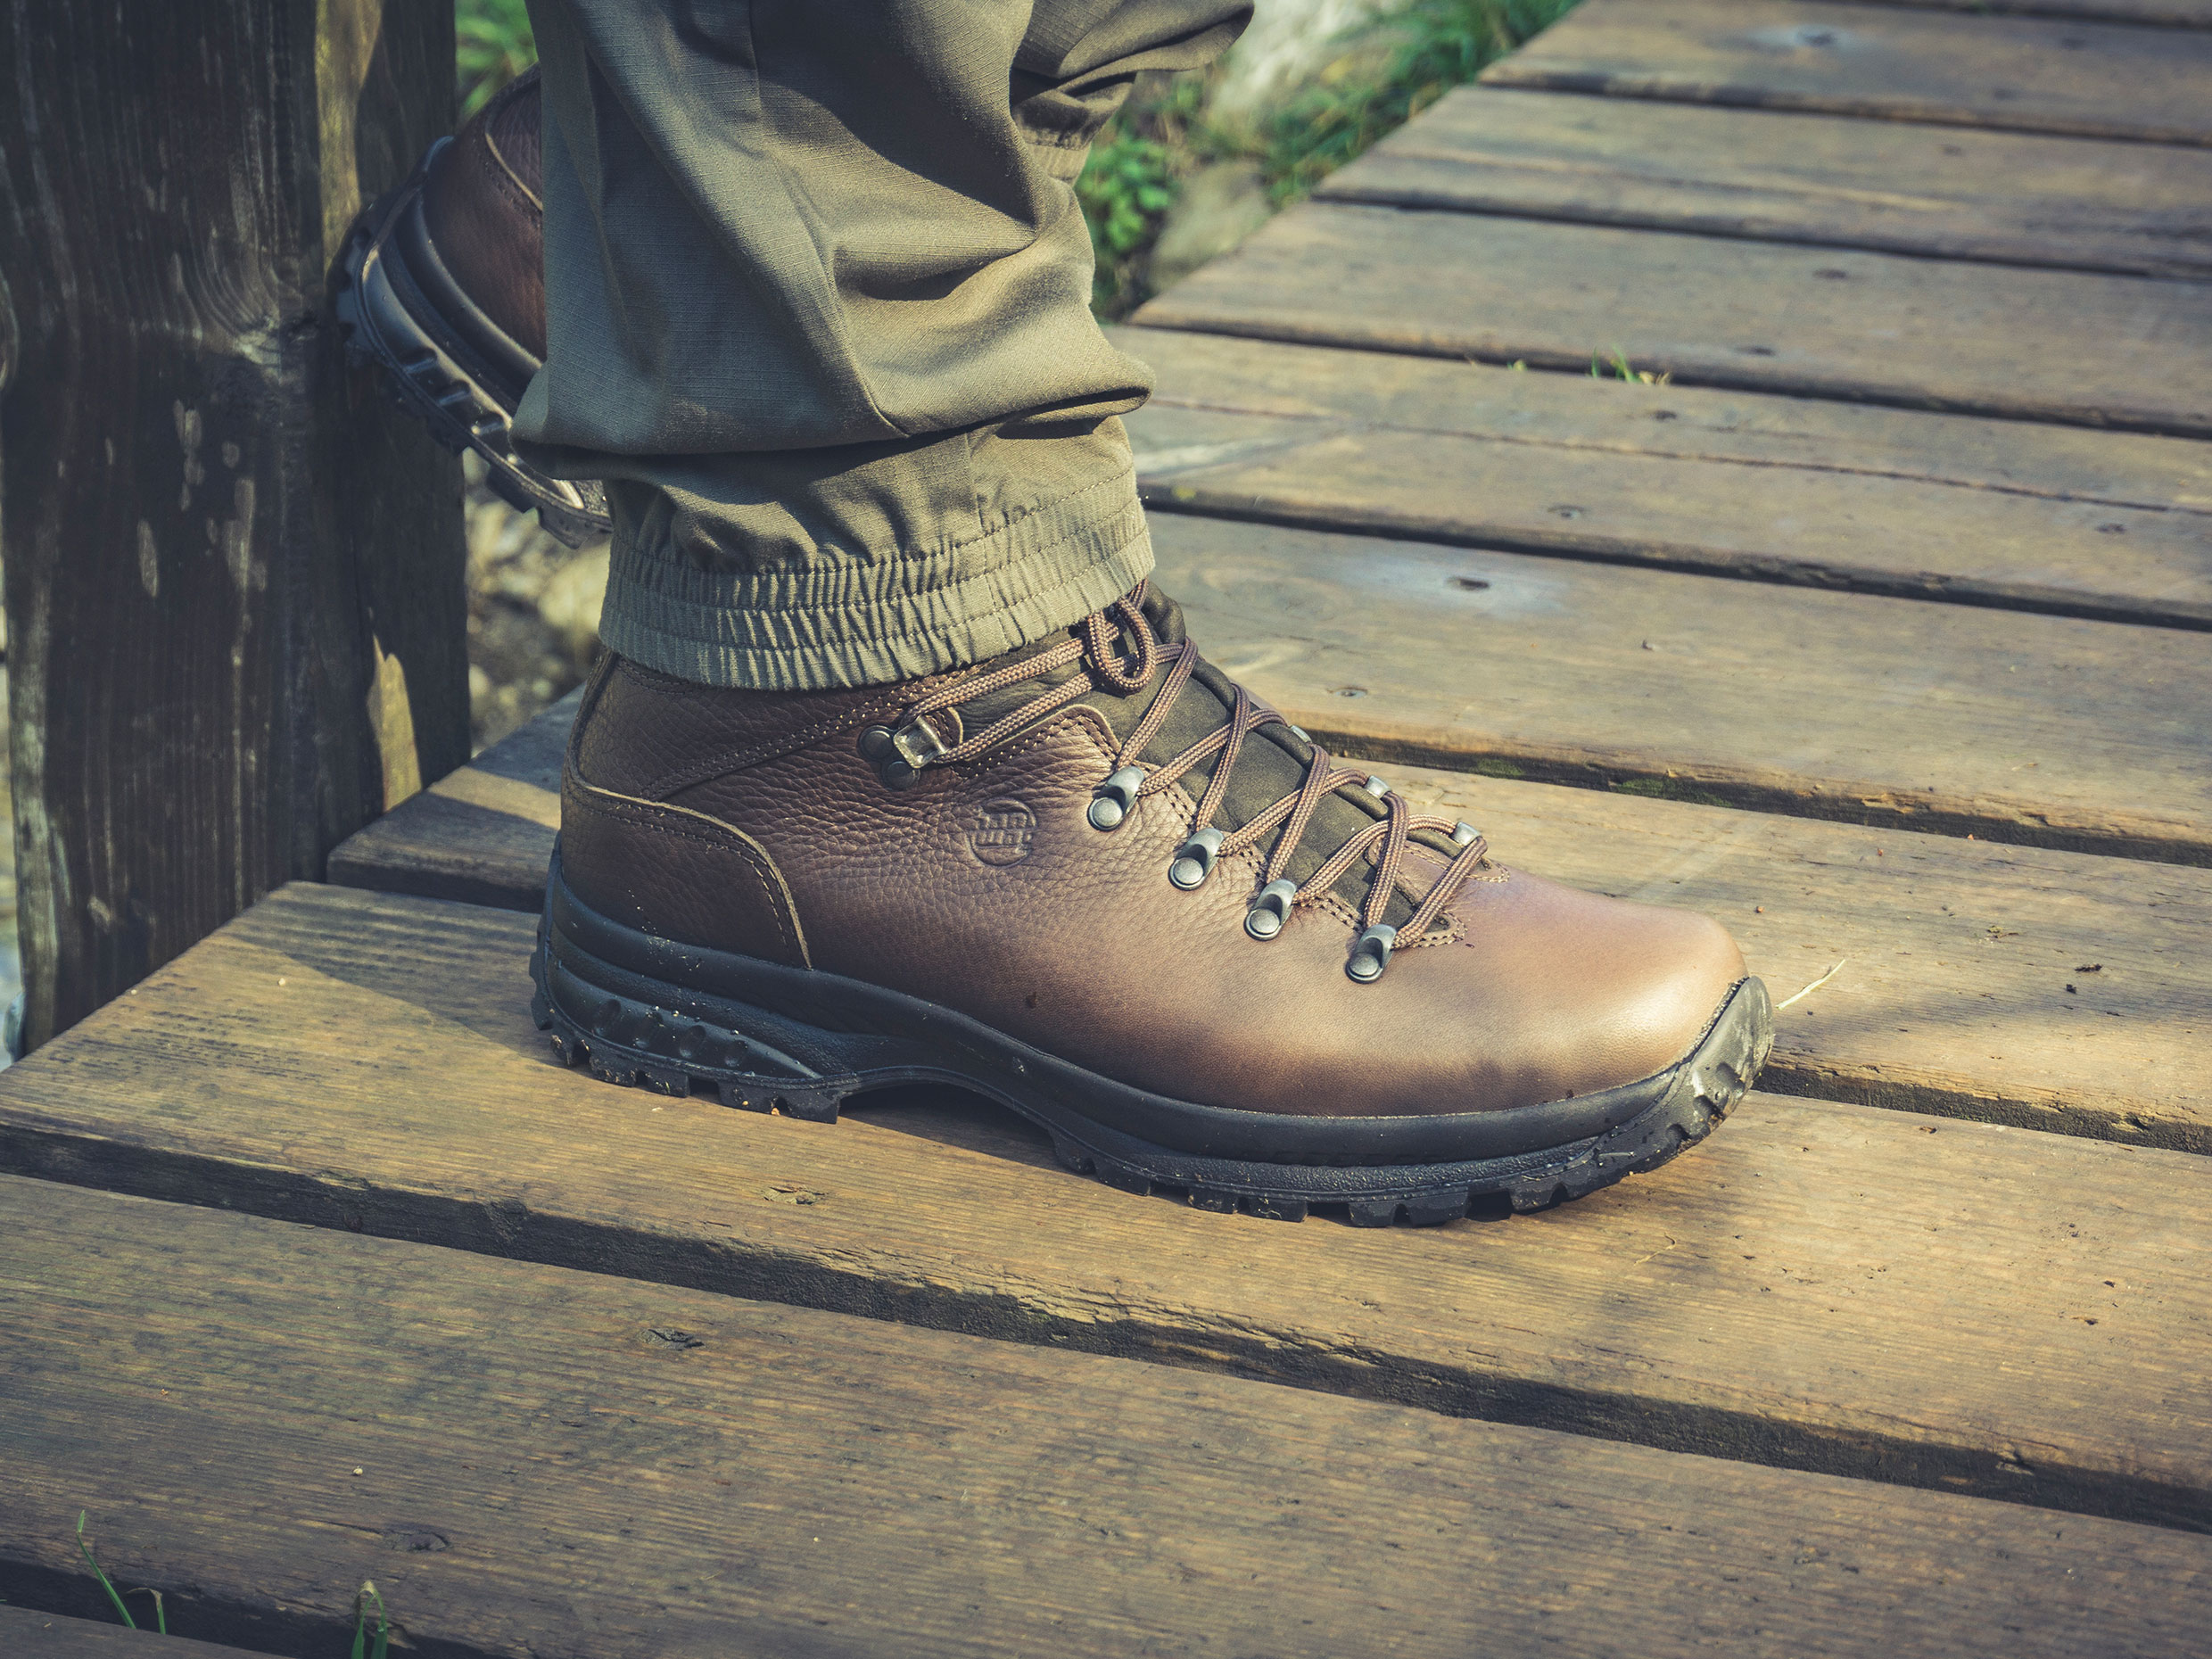 The Hanwag Waxenstein Bio – an ethical and eco-friendly hiking boot